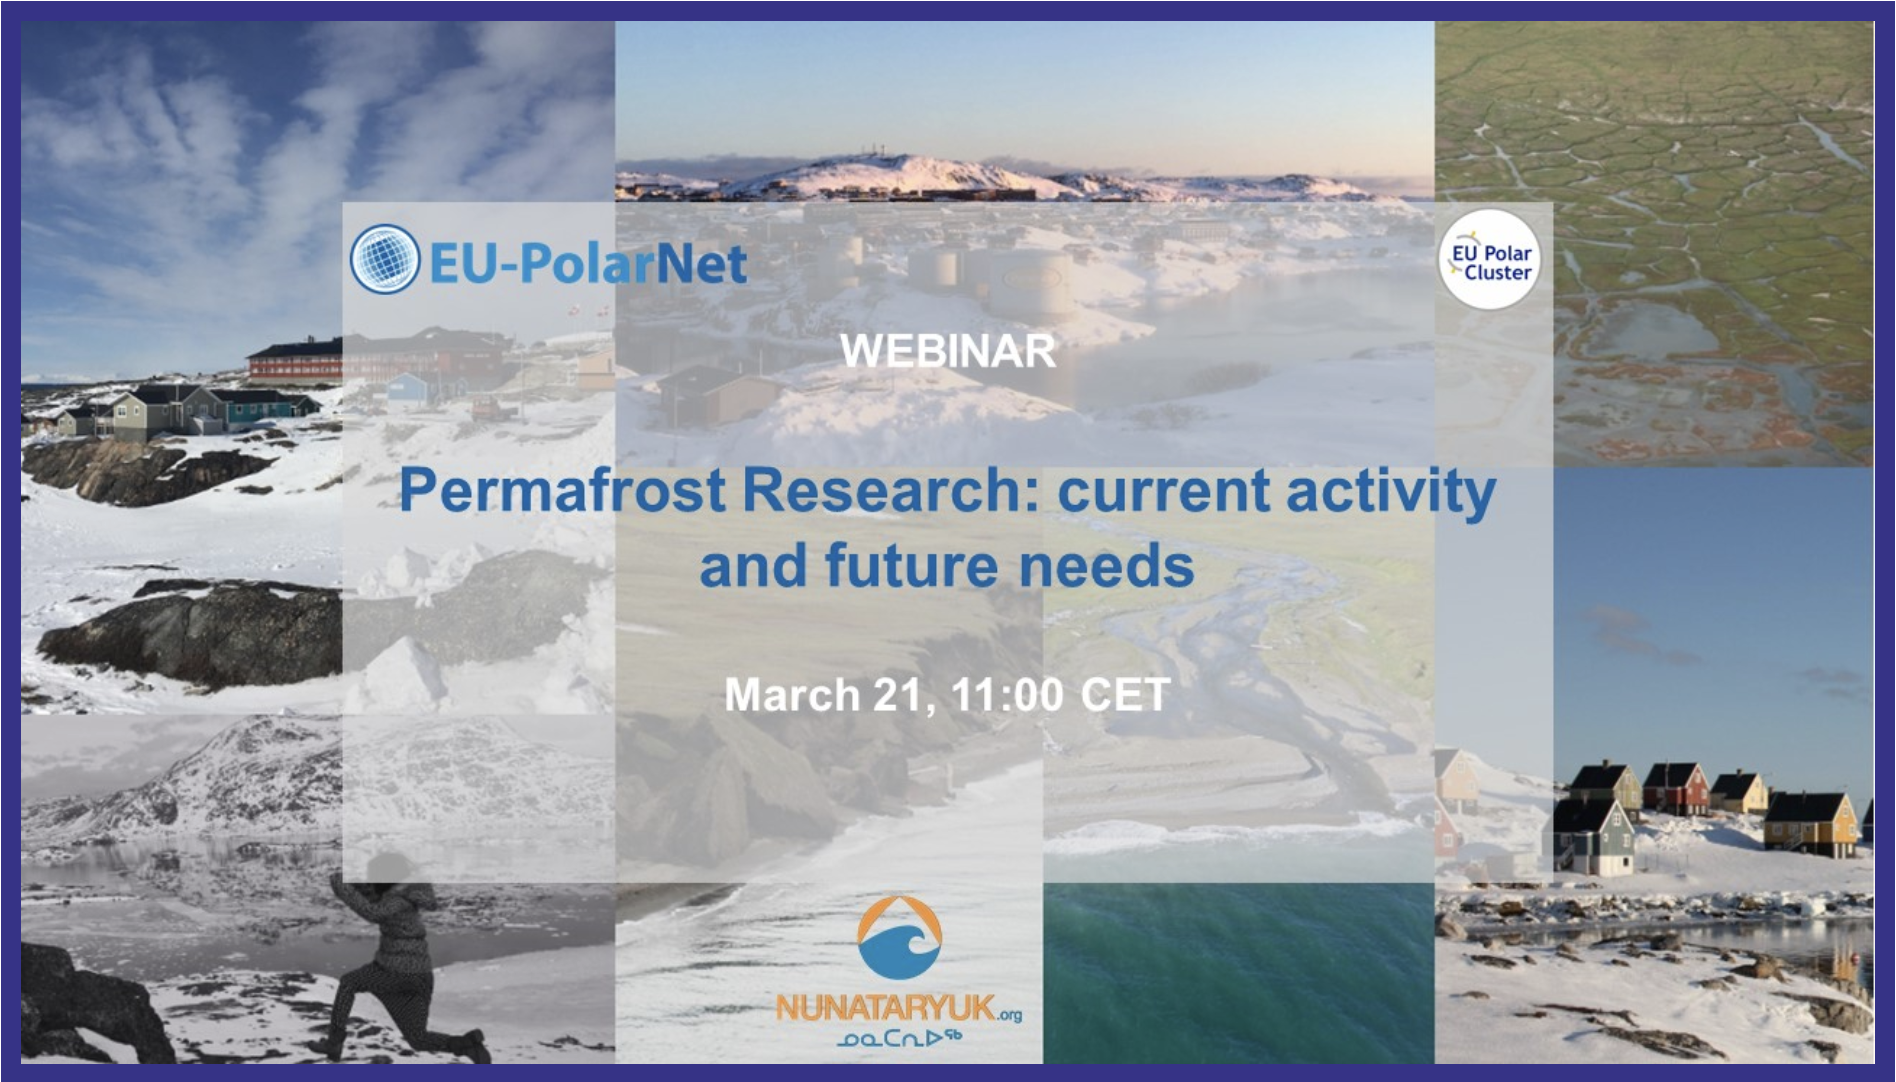 Webinar: "Permafrost Research: current activity and future needs"